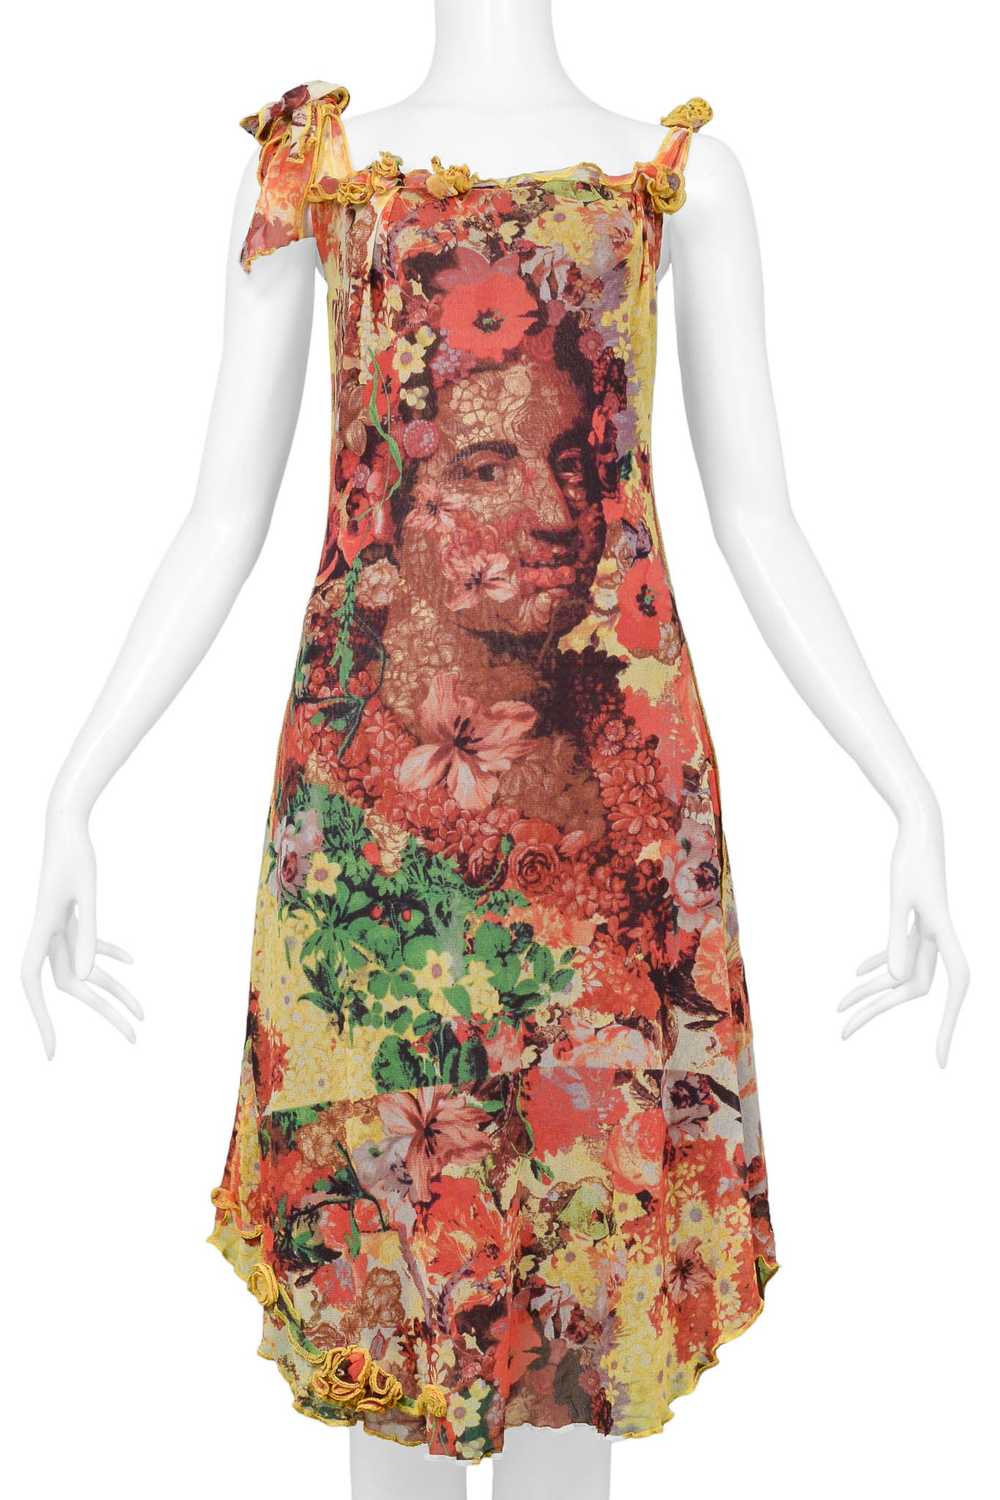 JEAN PAUL GAULTIER FLORAL PRINT MESH DRESS WITH P… - image 3